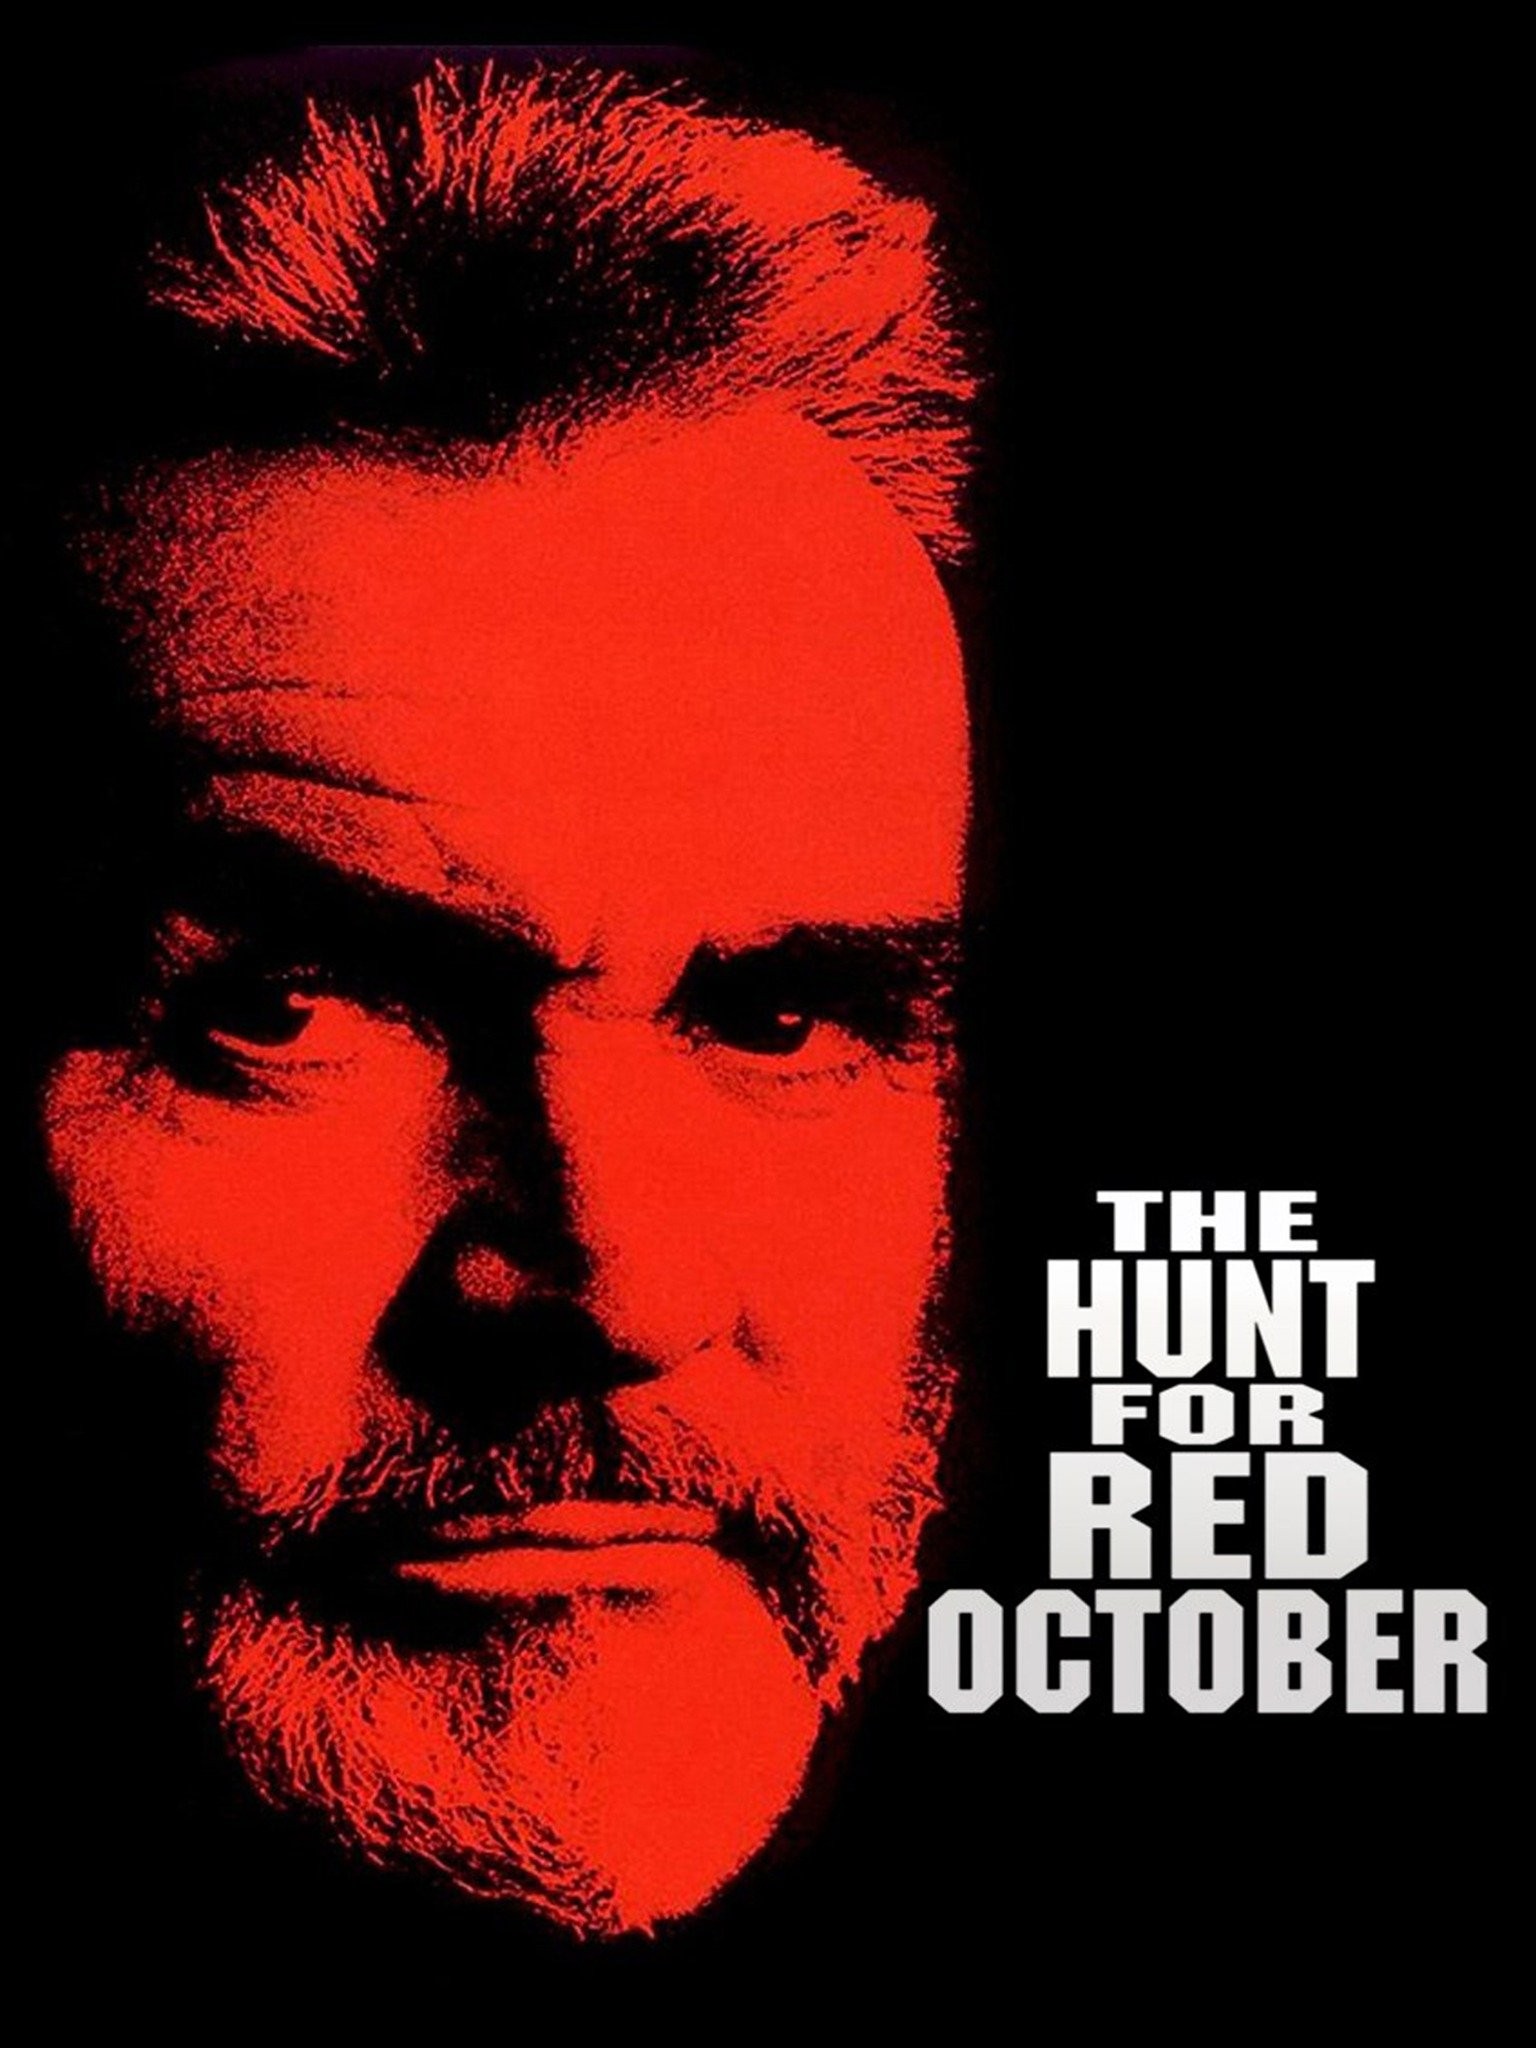 the red hunt for october